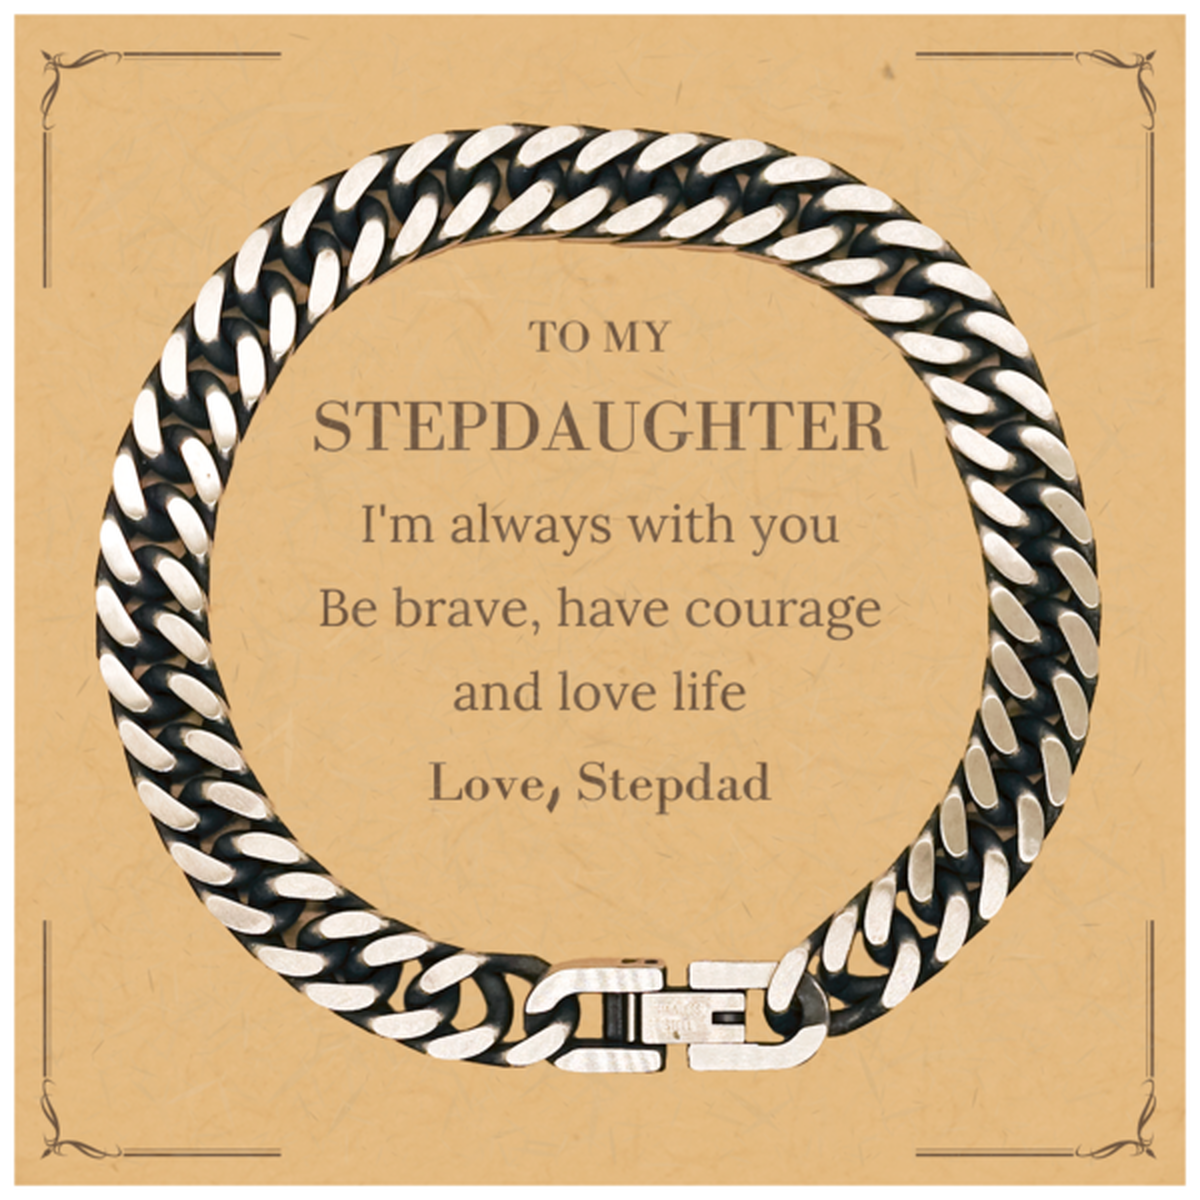 To My Stepdaughter Gifts from Stepdad, Unique Cuban Link Chain Bracelet Inspirational Christmas Birthday Graduation Gifts for Stepdaughter I'm always with you. Be brave, have courage and love life. Love, Stepdad